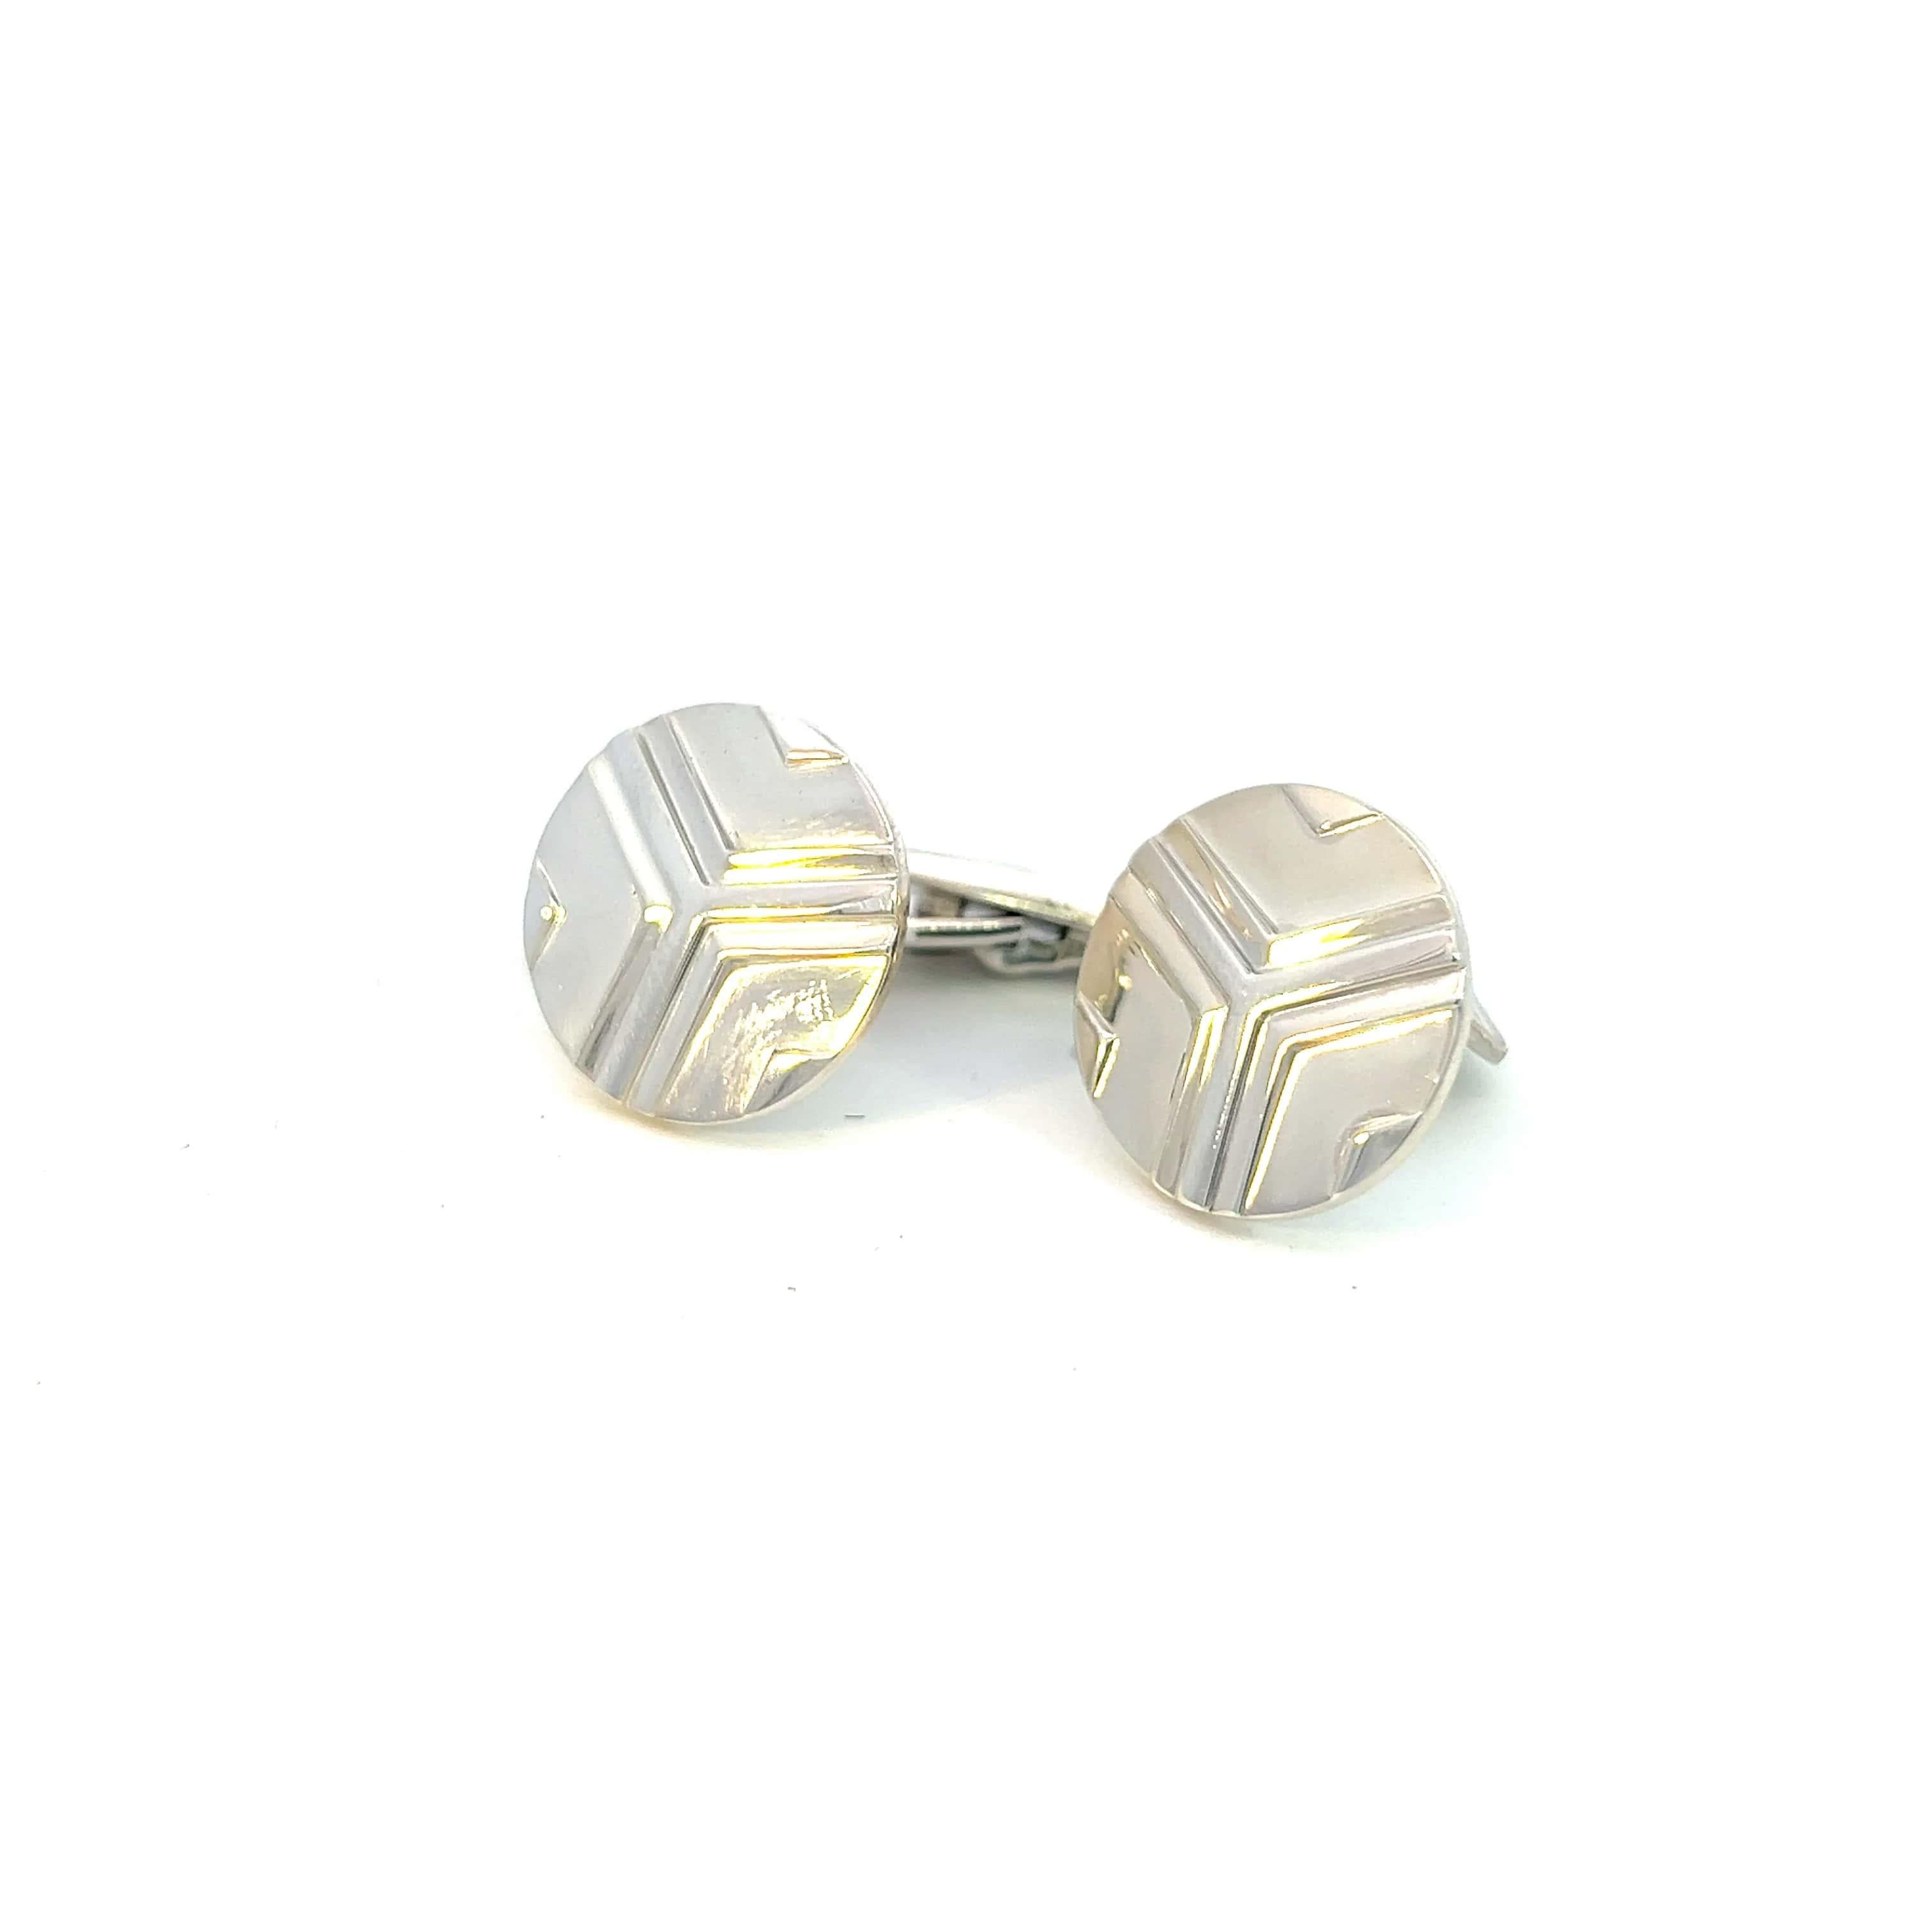 Georg Jensen Estate Cufflinks Sterling Silver GJ23

These elegant Authentic Georg Jensen Men's Cufflinks are made of sterling silver and have a weight of 14.3 grams.

TRUSTED SELLER SINCE 2002

PLEASE SEE OUR HUNDREDS OF POSITIVE FEEDBACKS FROM OUR